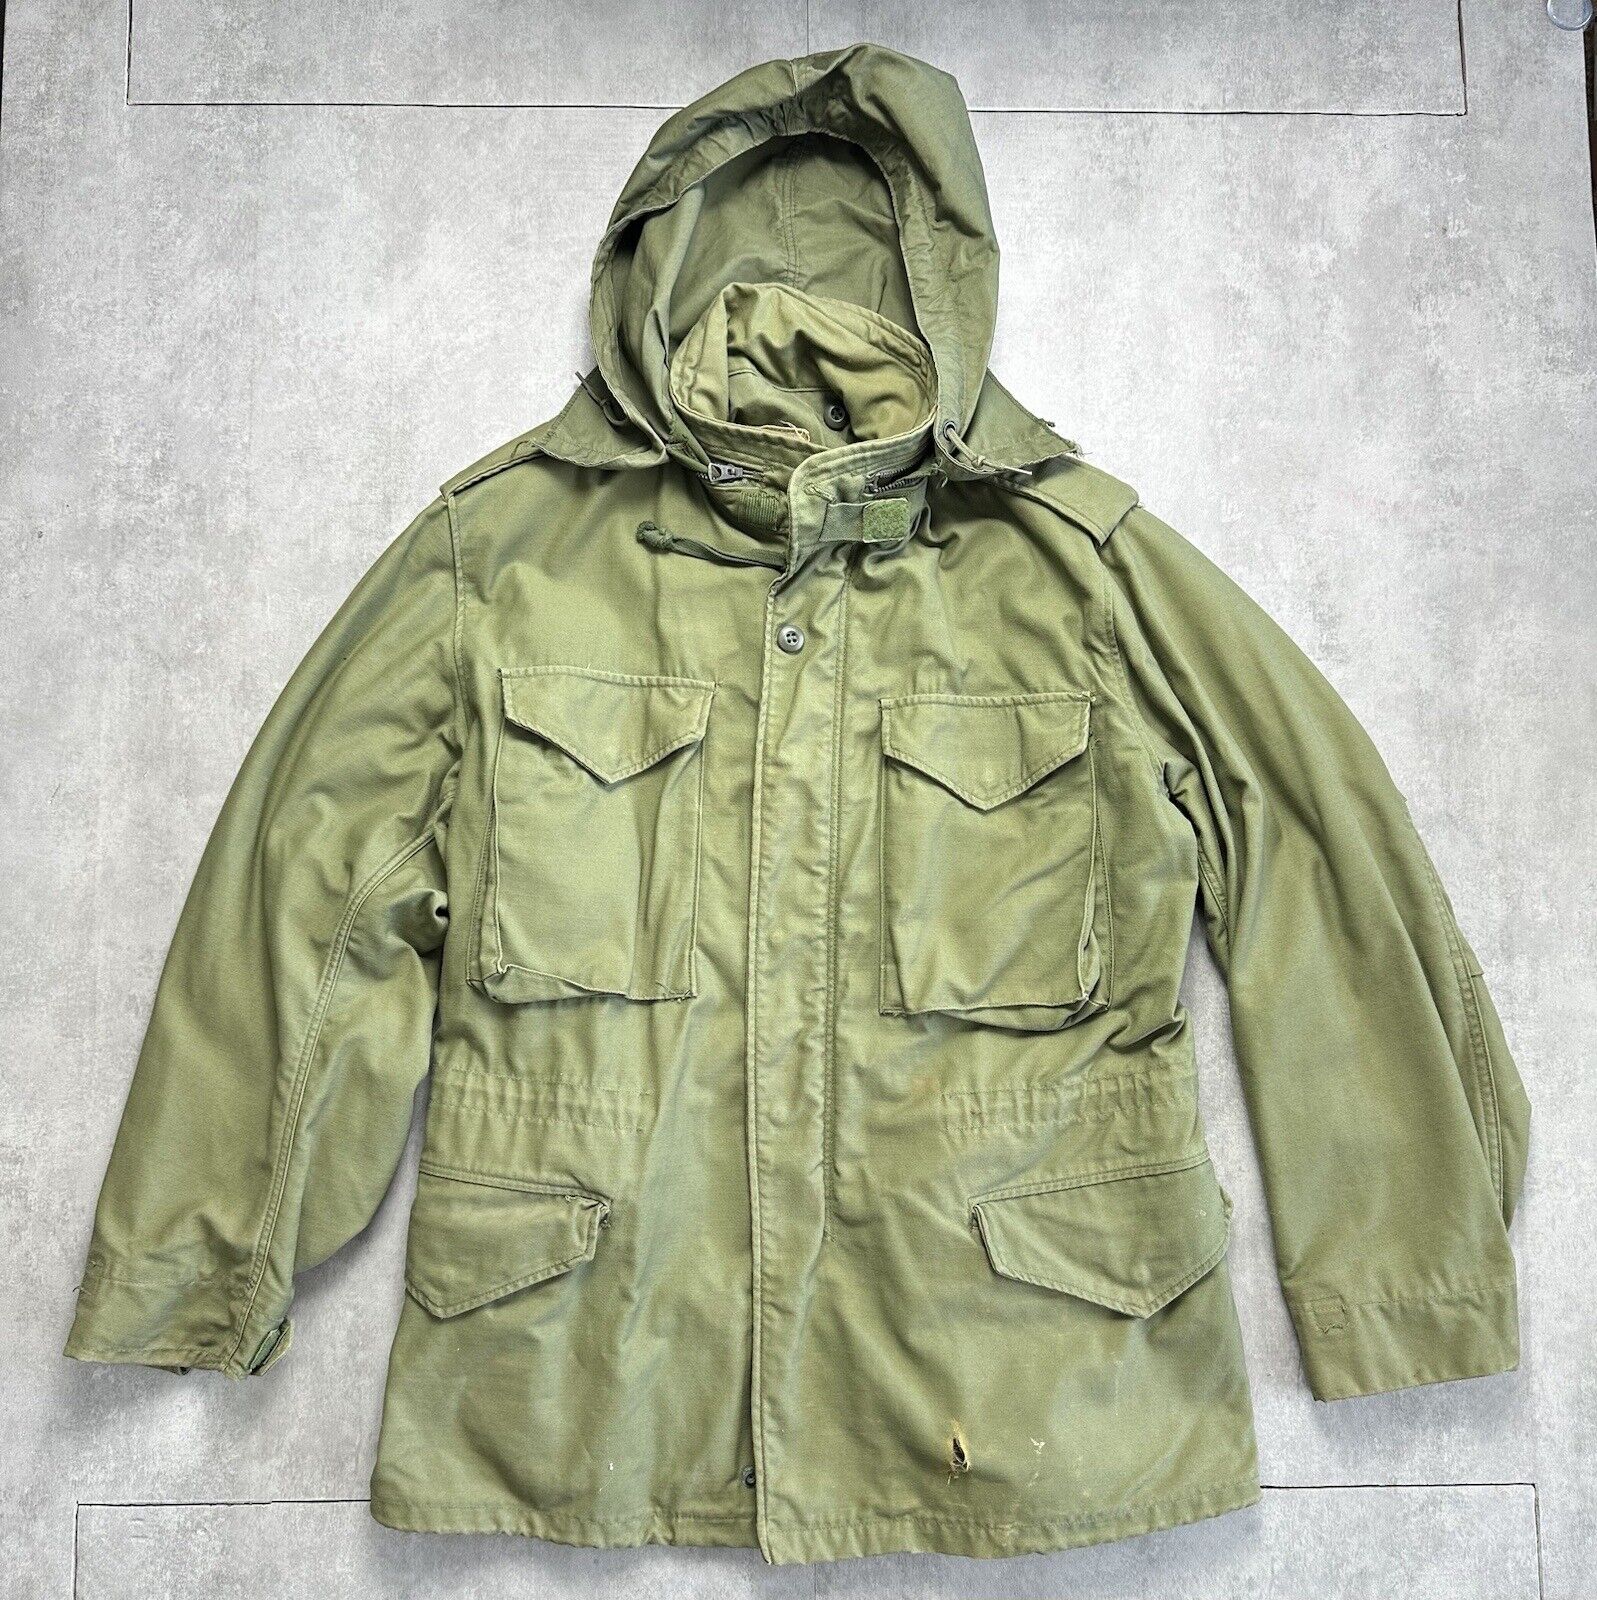 Vintage 70s US Army M-65 Cold Weather Field Coat Jacket Small Short With Lining